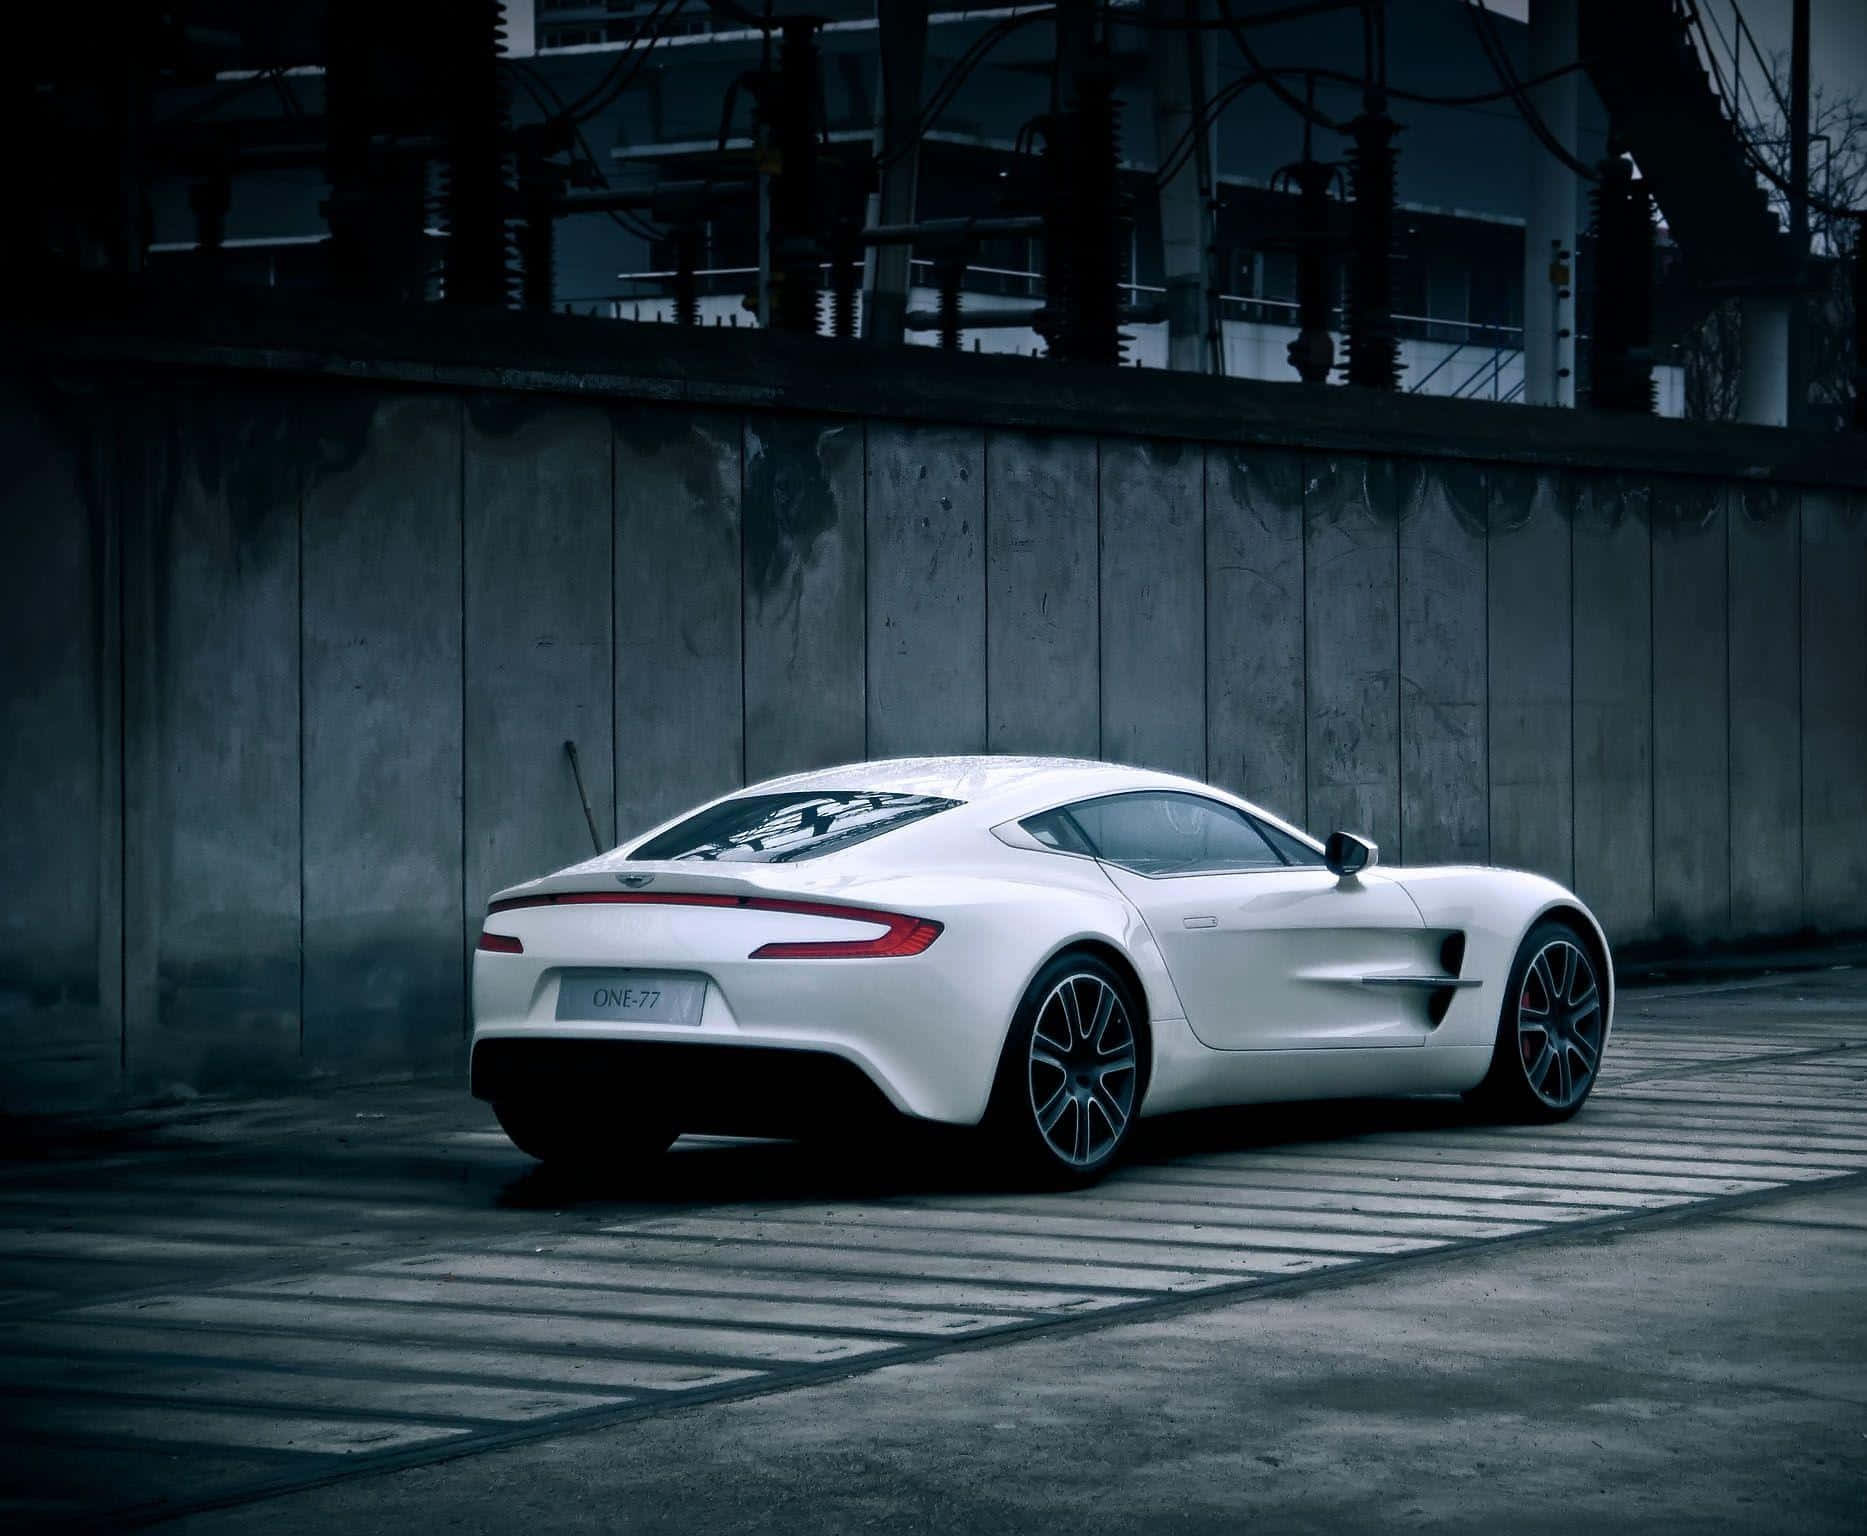 Aston Martin One-77 on the road Wallpaper